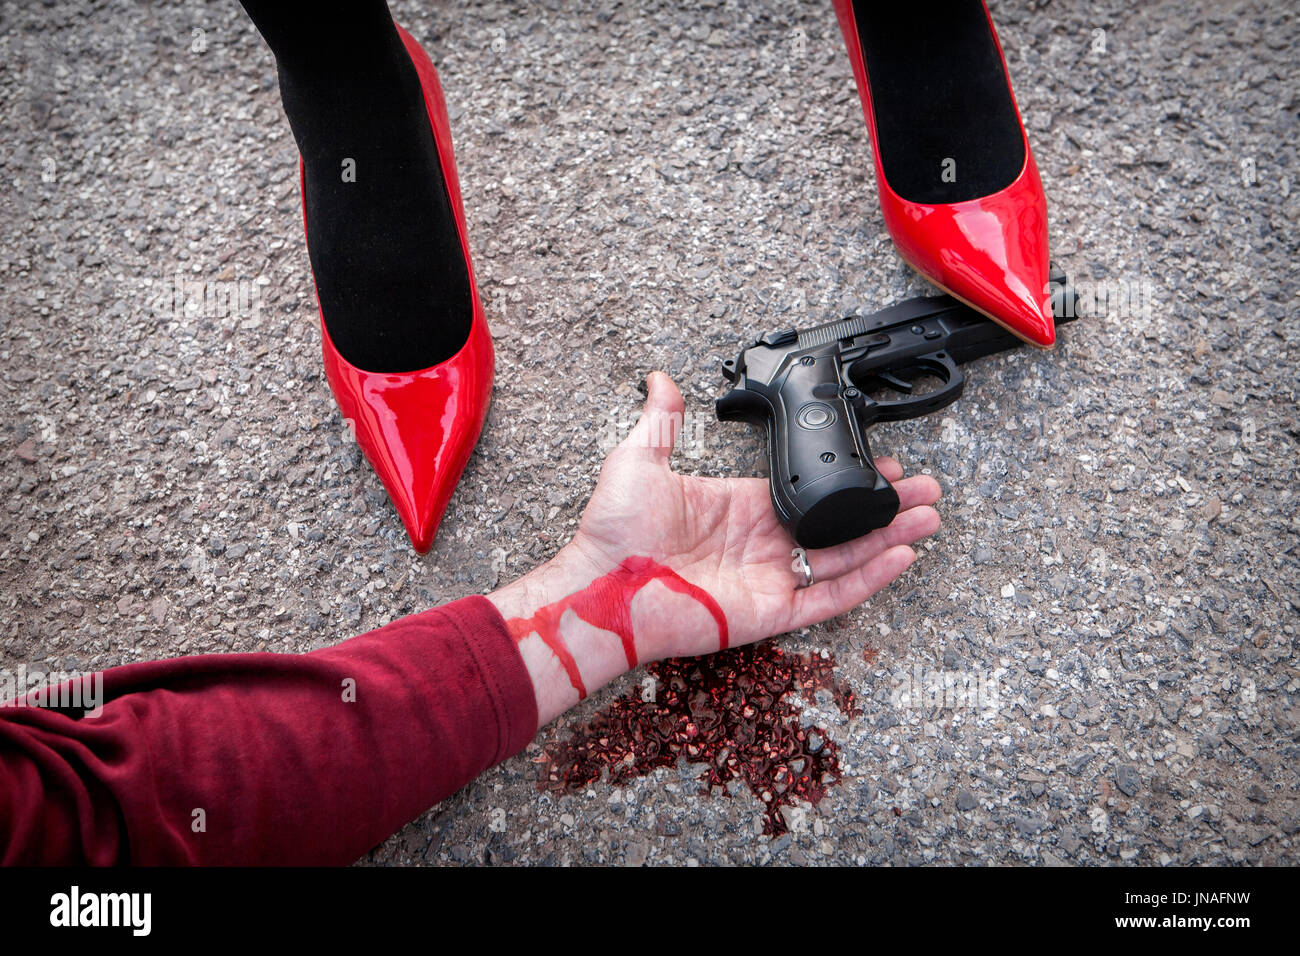 Man is dominated by a woman with red shoes, the shoe tread gun arm bloodied on the asphalt Stock Photo